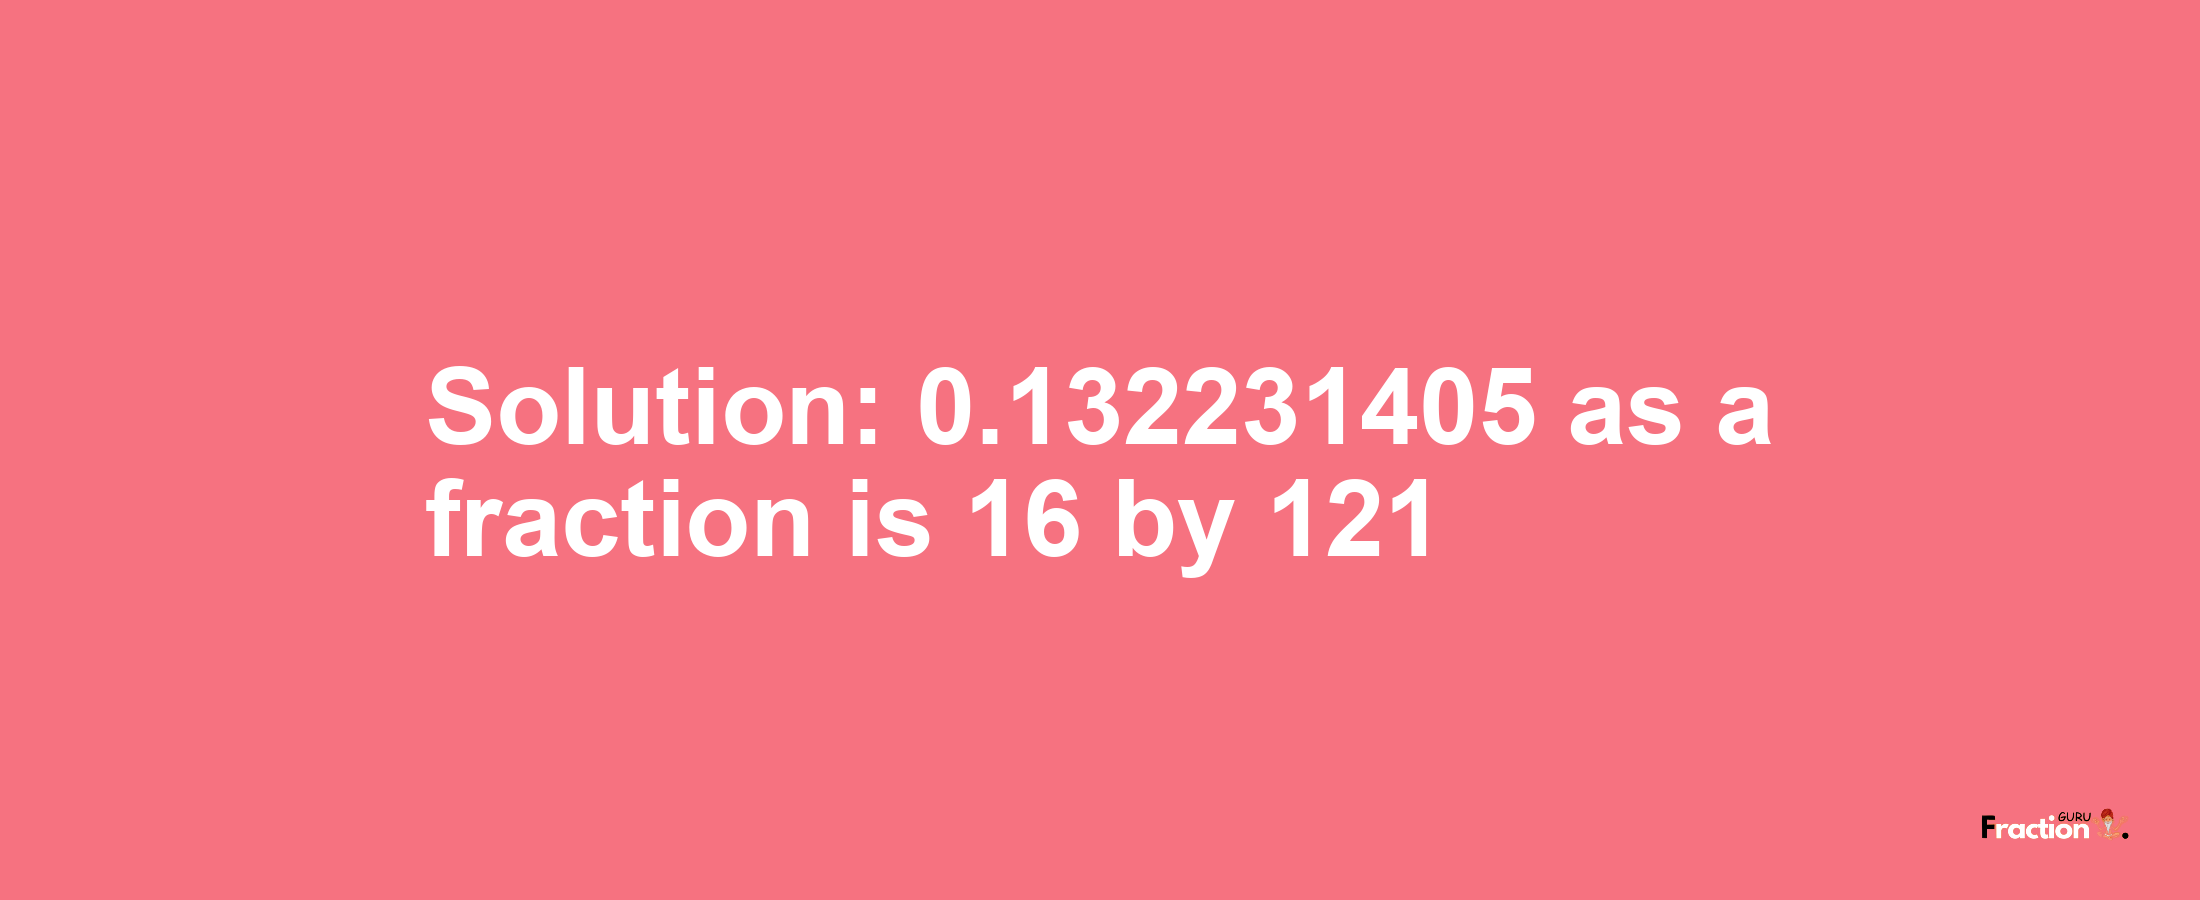 Solution:0.132231405 as a fraction is 16/121